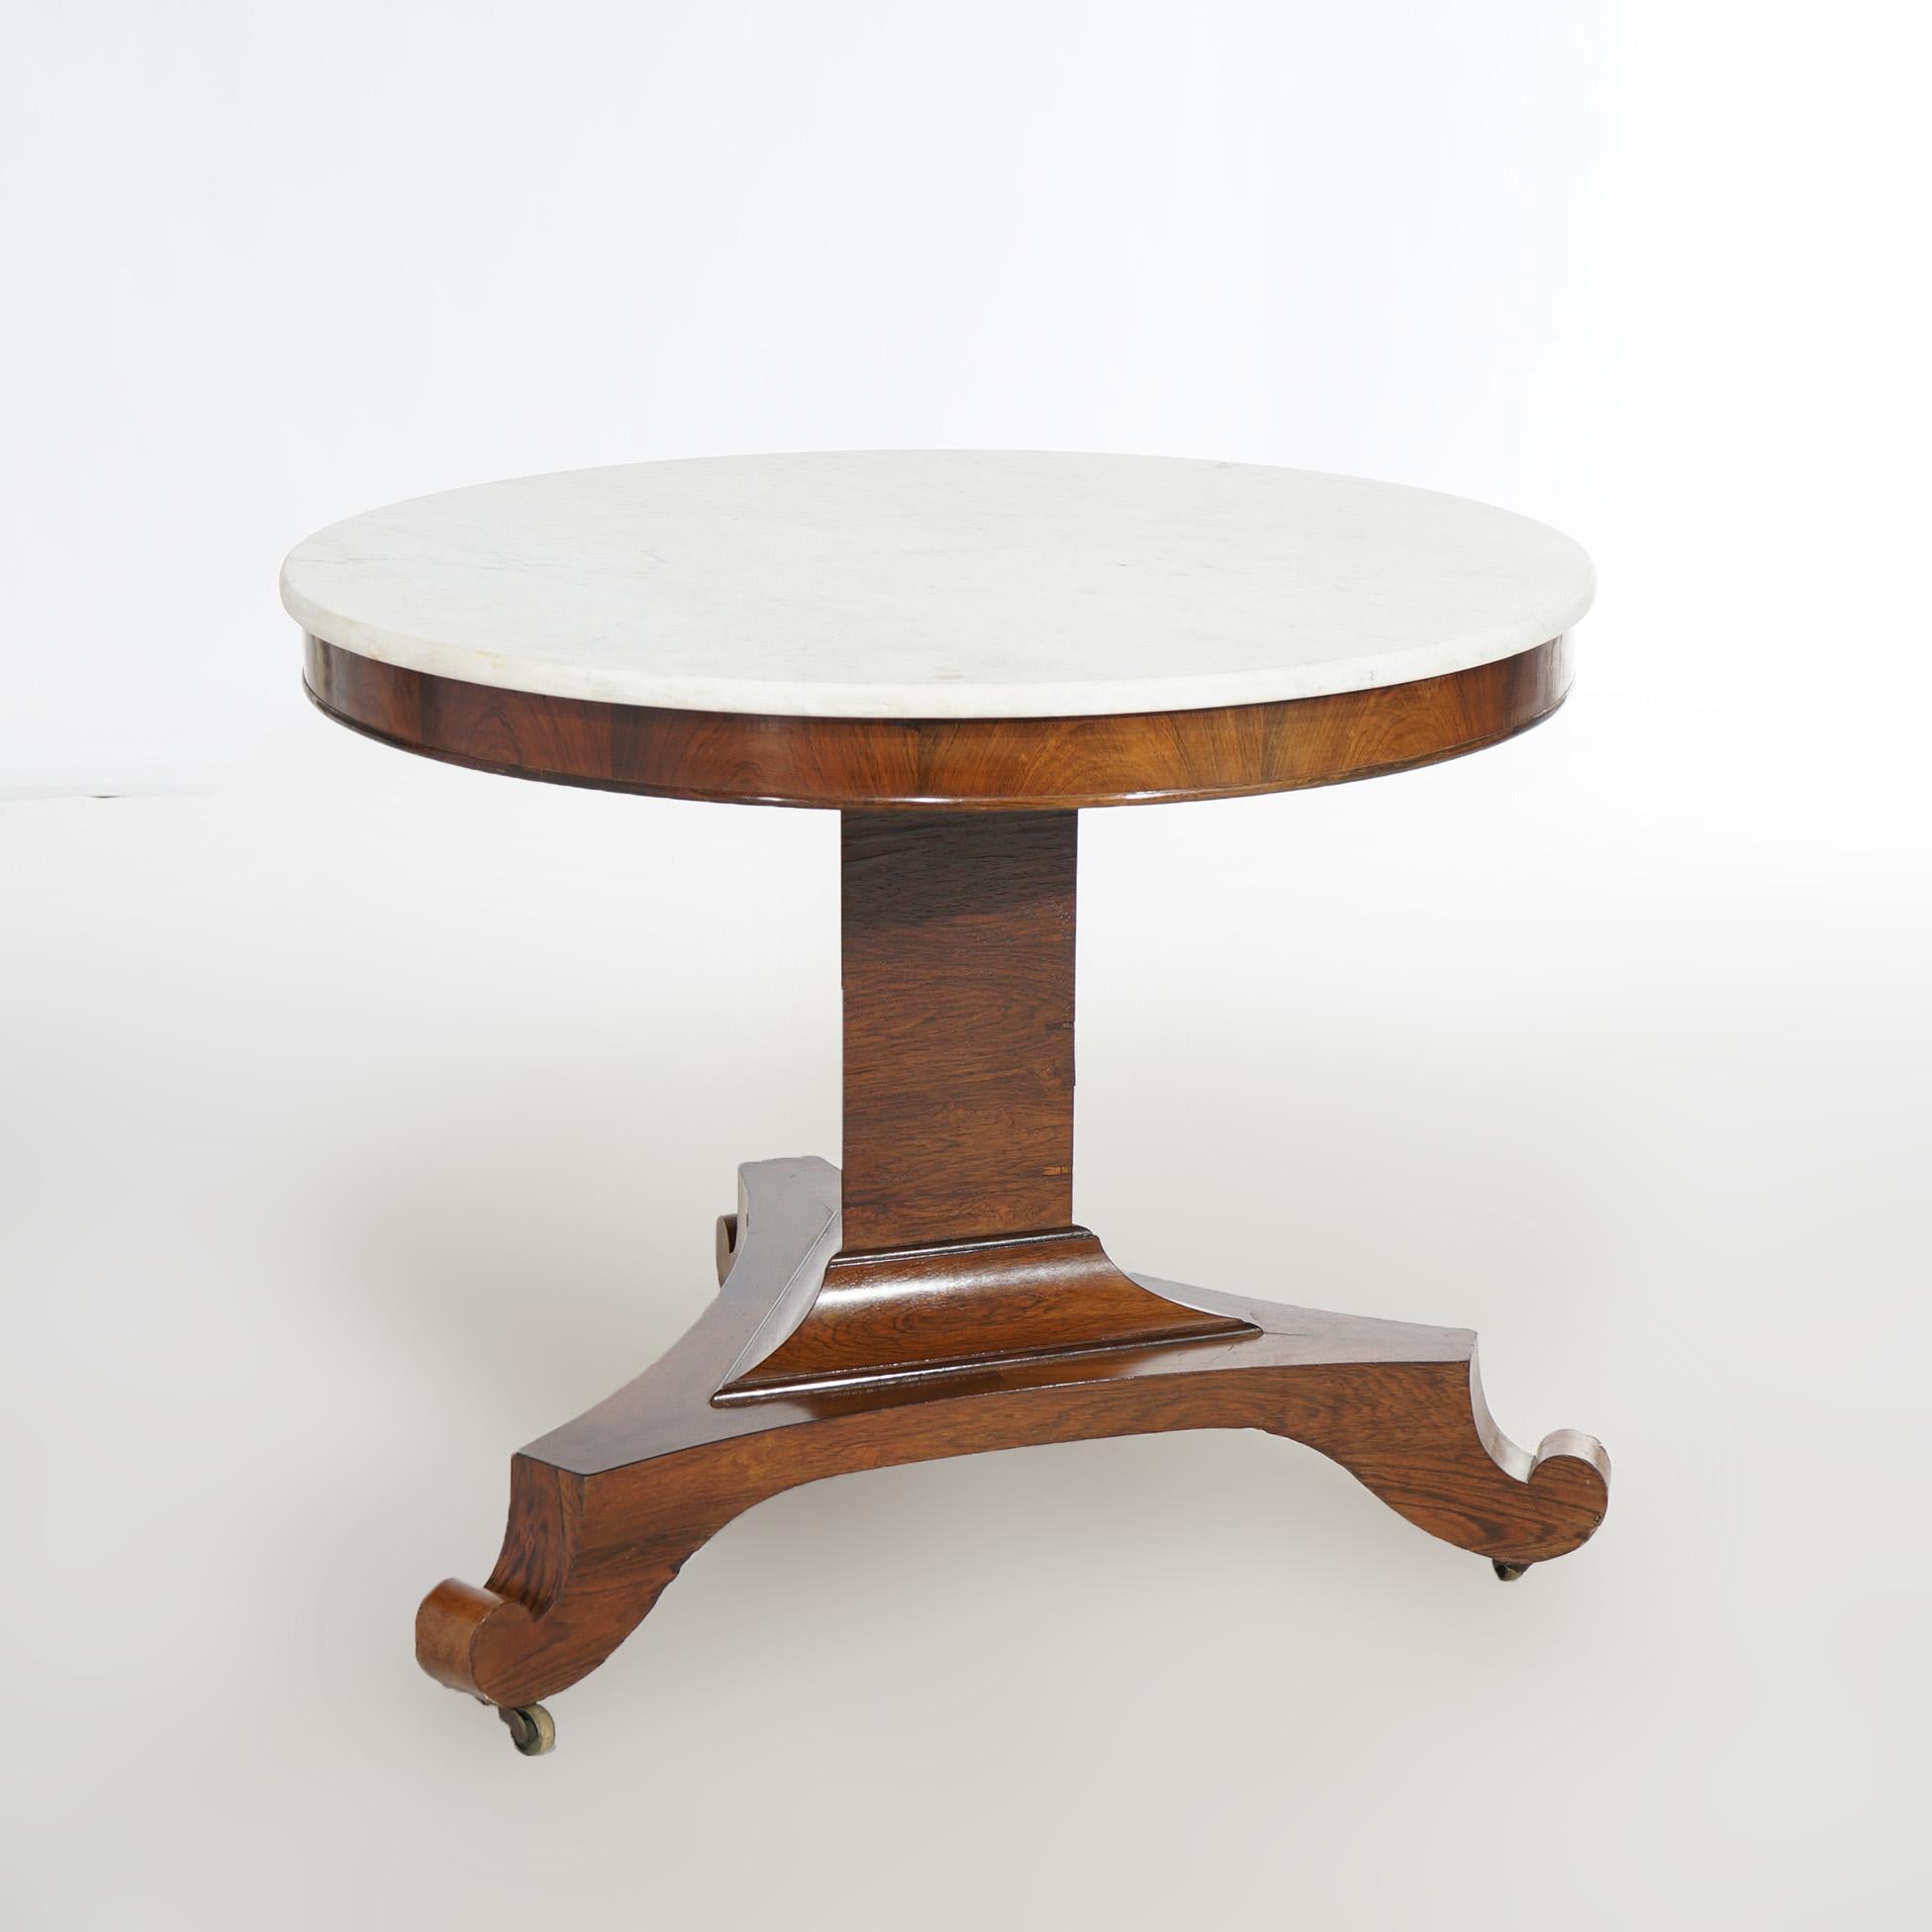 North American Antique American Empire Greco Quervelle School Mahogany & Marble Center Table For Sale